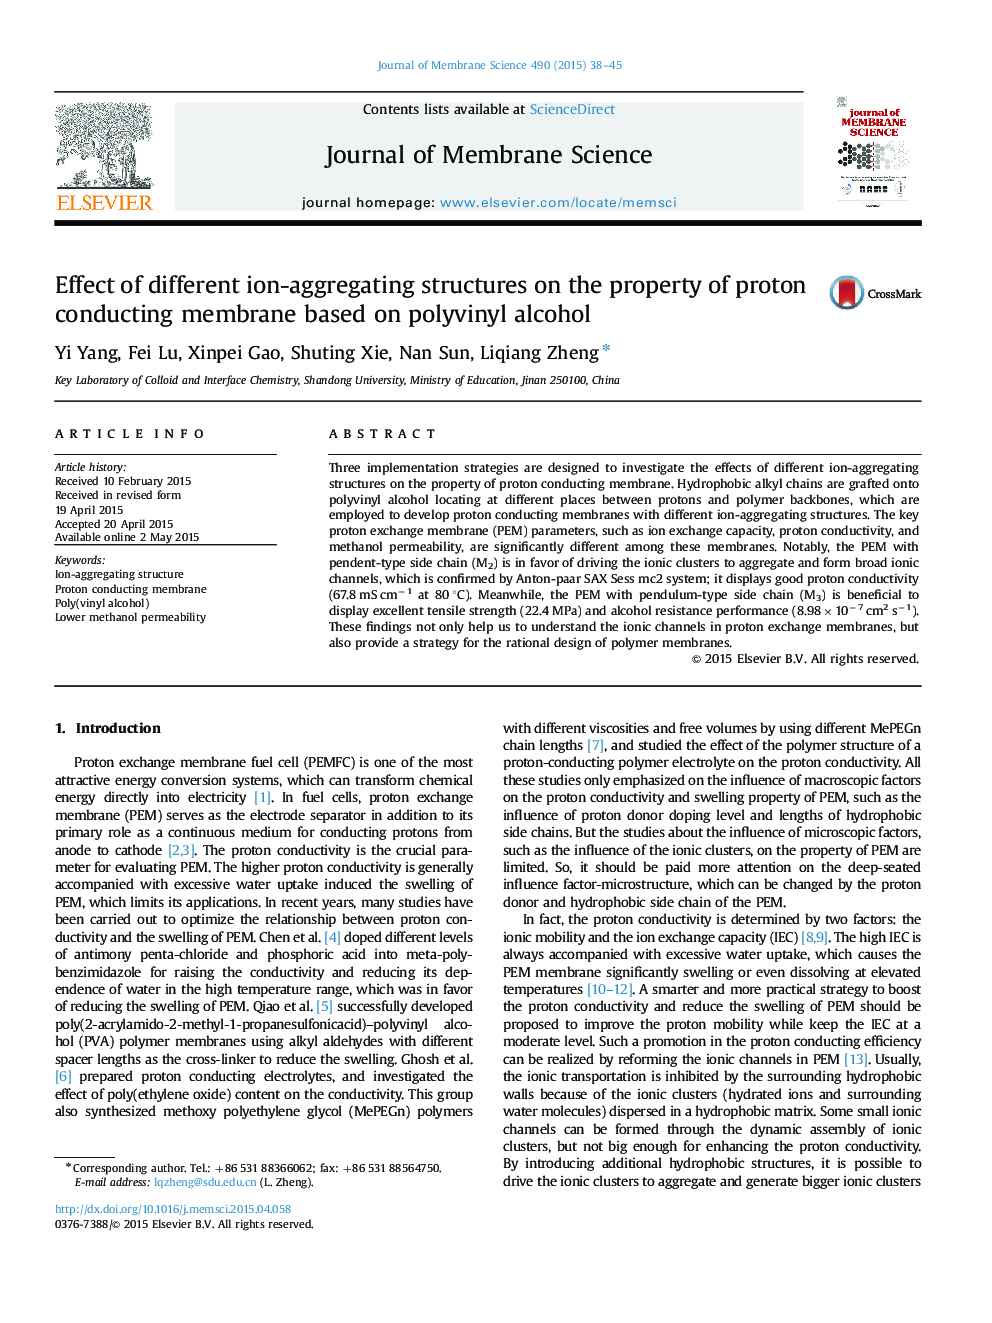 Effect of different ion-aggregating structures on the property of proton conducting membrane based on polyvinyl alcohol